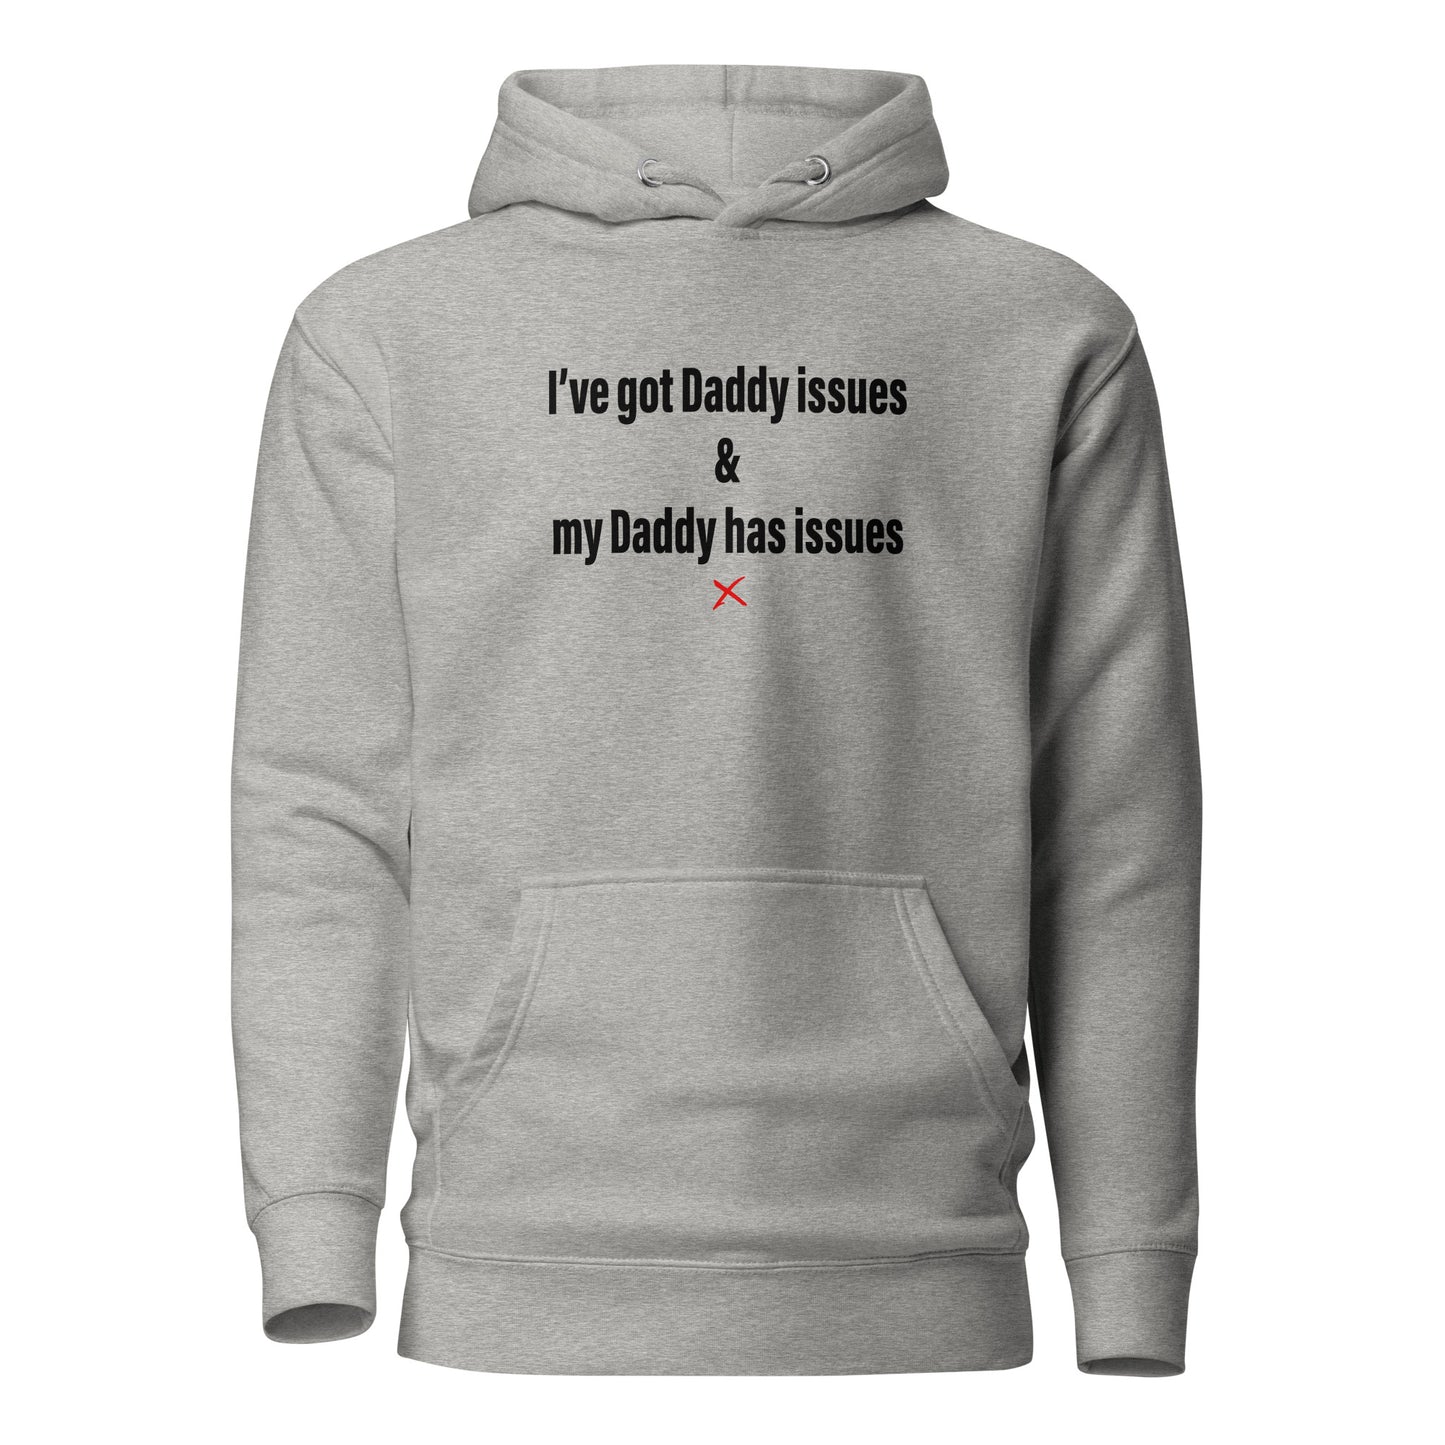 I've got Daddy issues & my Daddy has issues - Hoodie